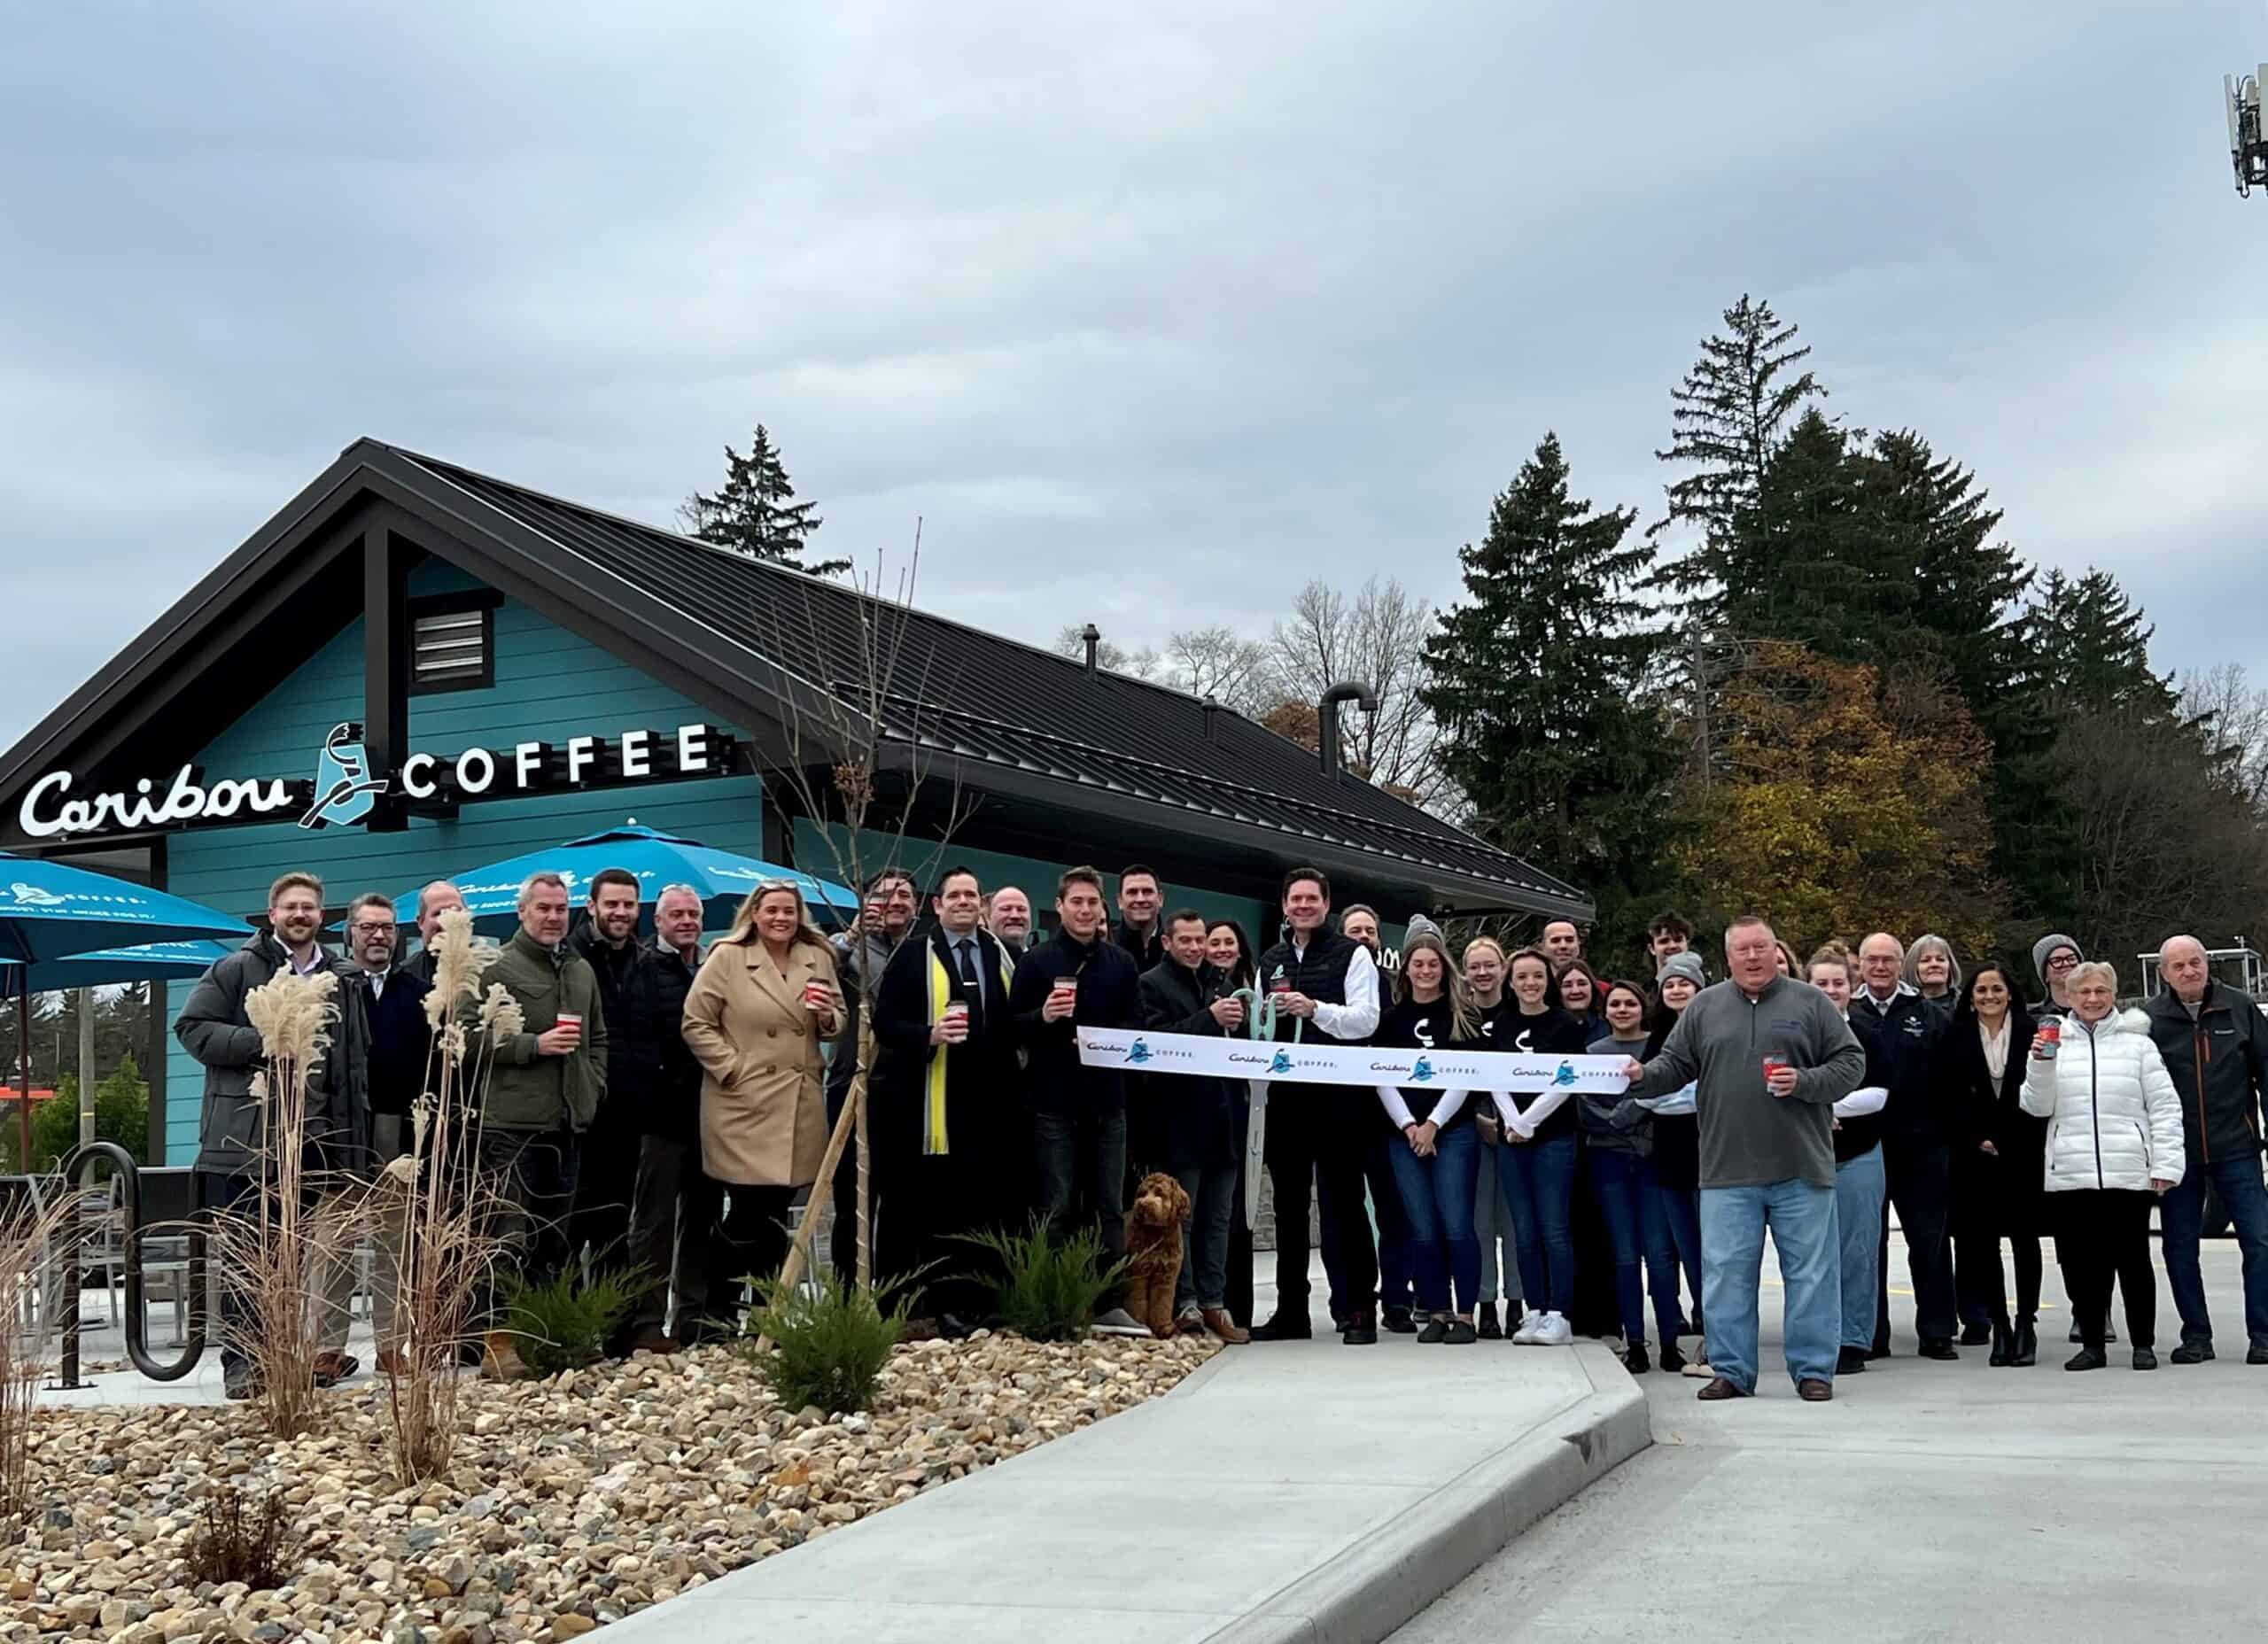 mike mariola restaurant team and caribou coffee team standing outside new caribou coffee cabin in wooster ohio for ribbon cutting ceremony